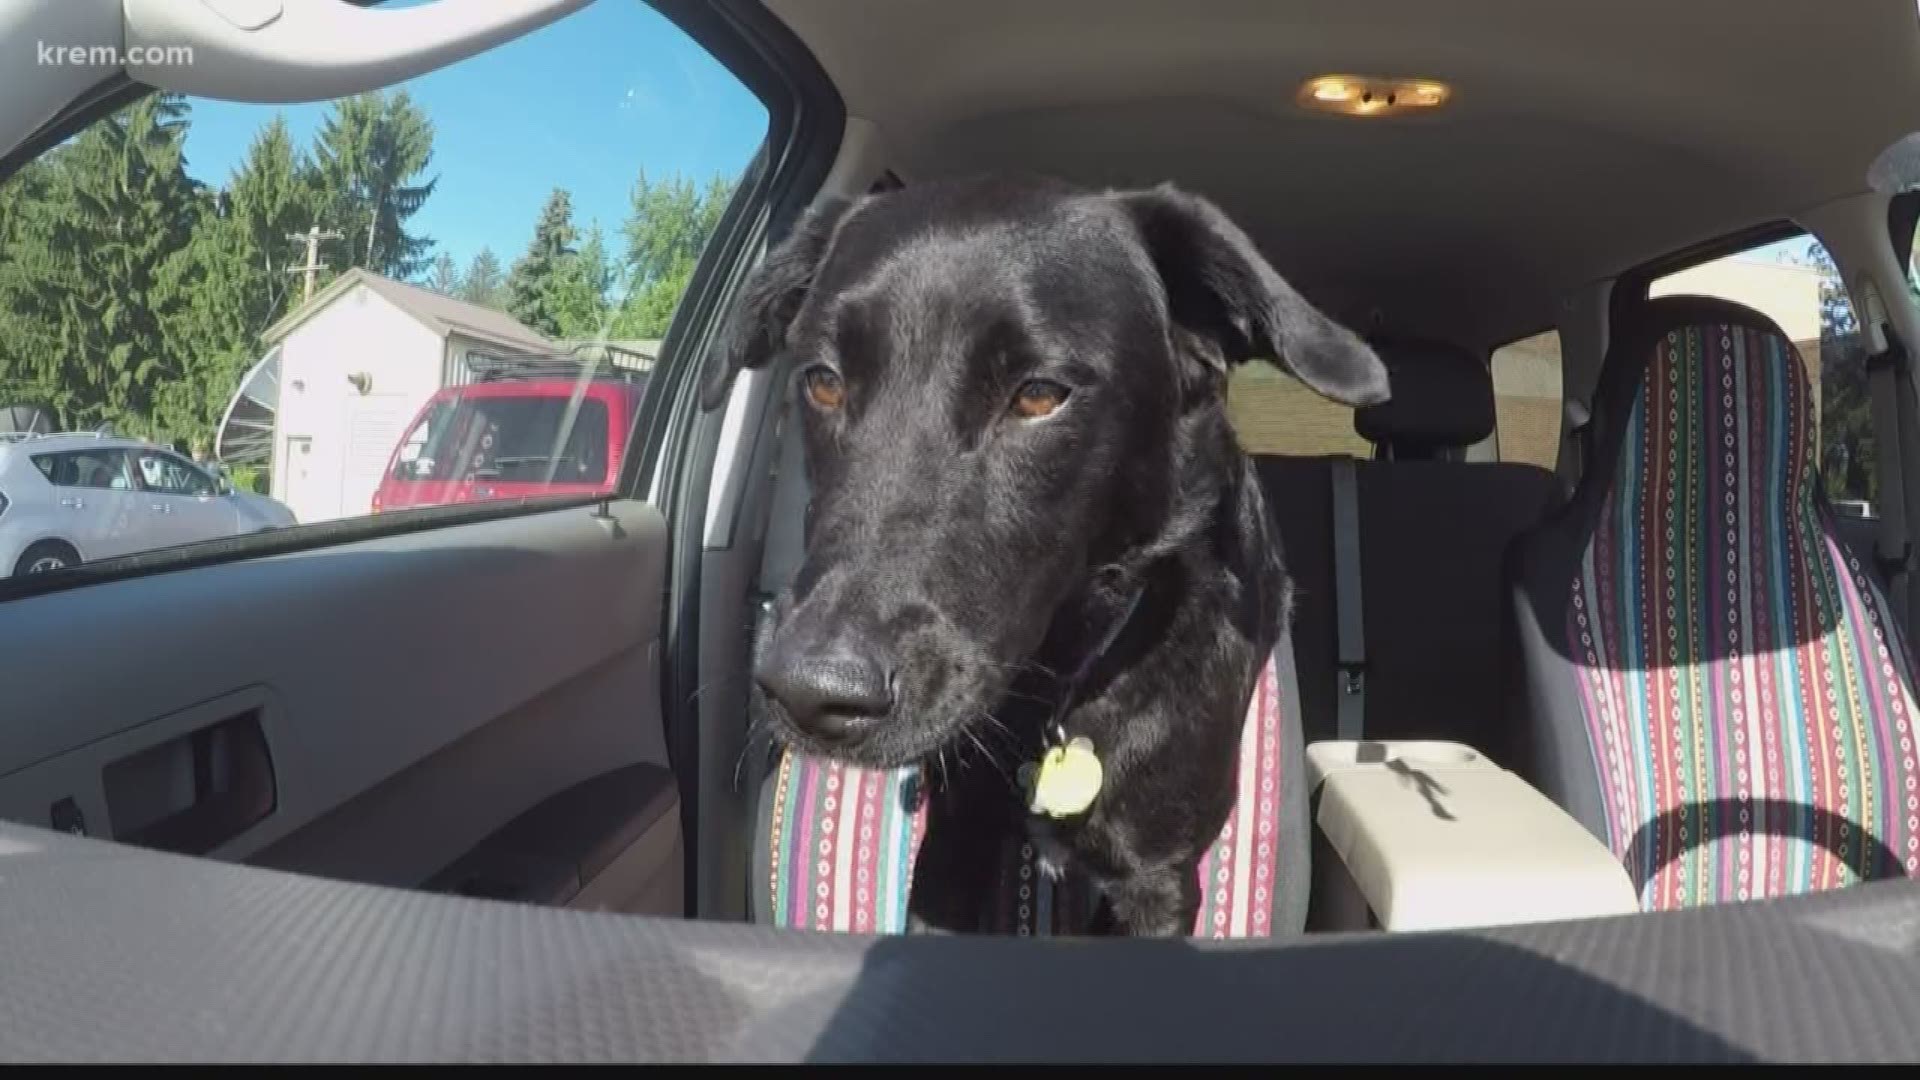 What to do if you see animals in a hot car in Washington, Idaho 